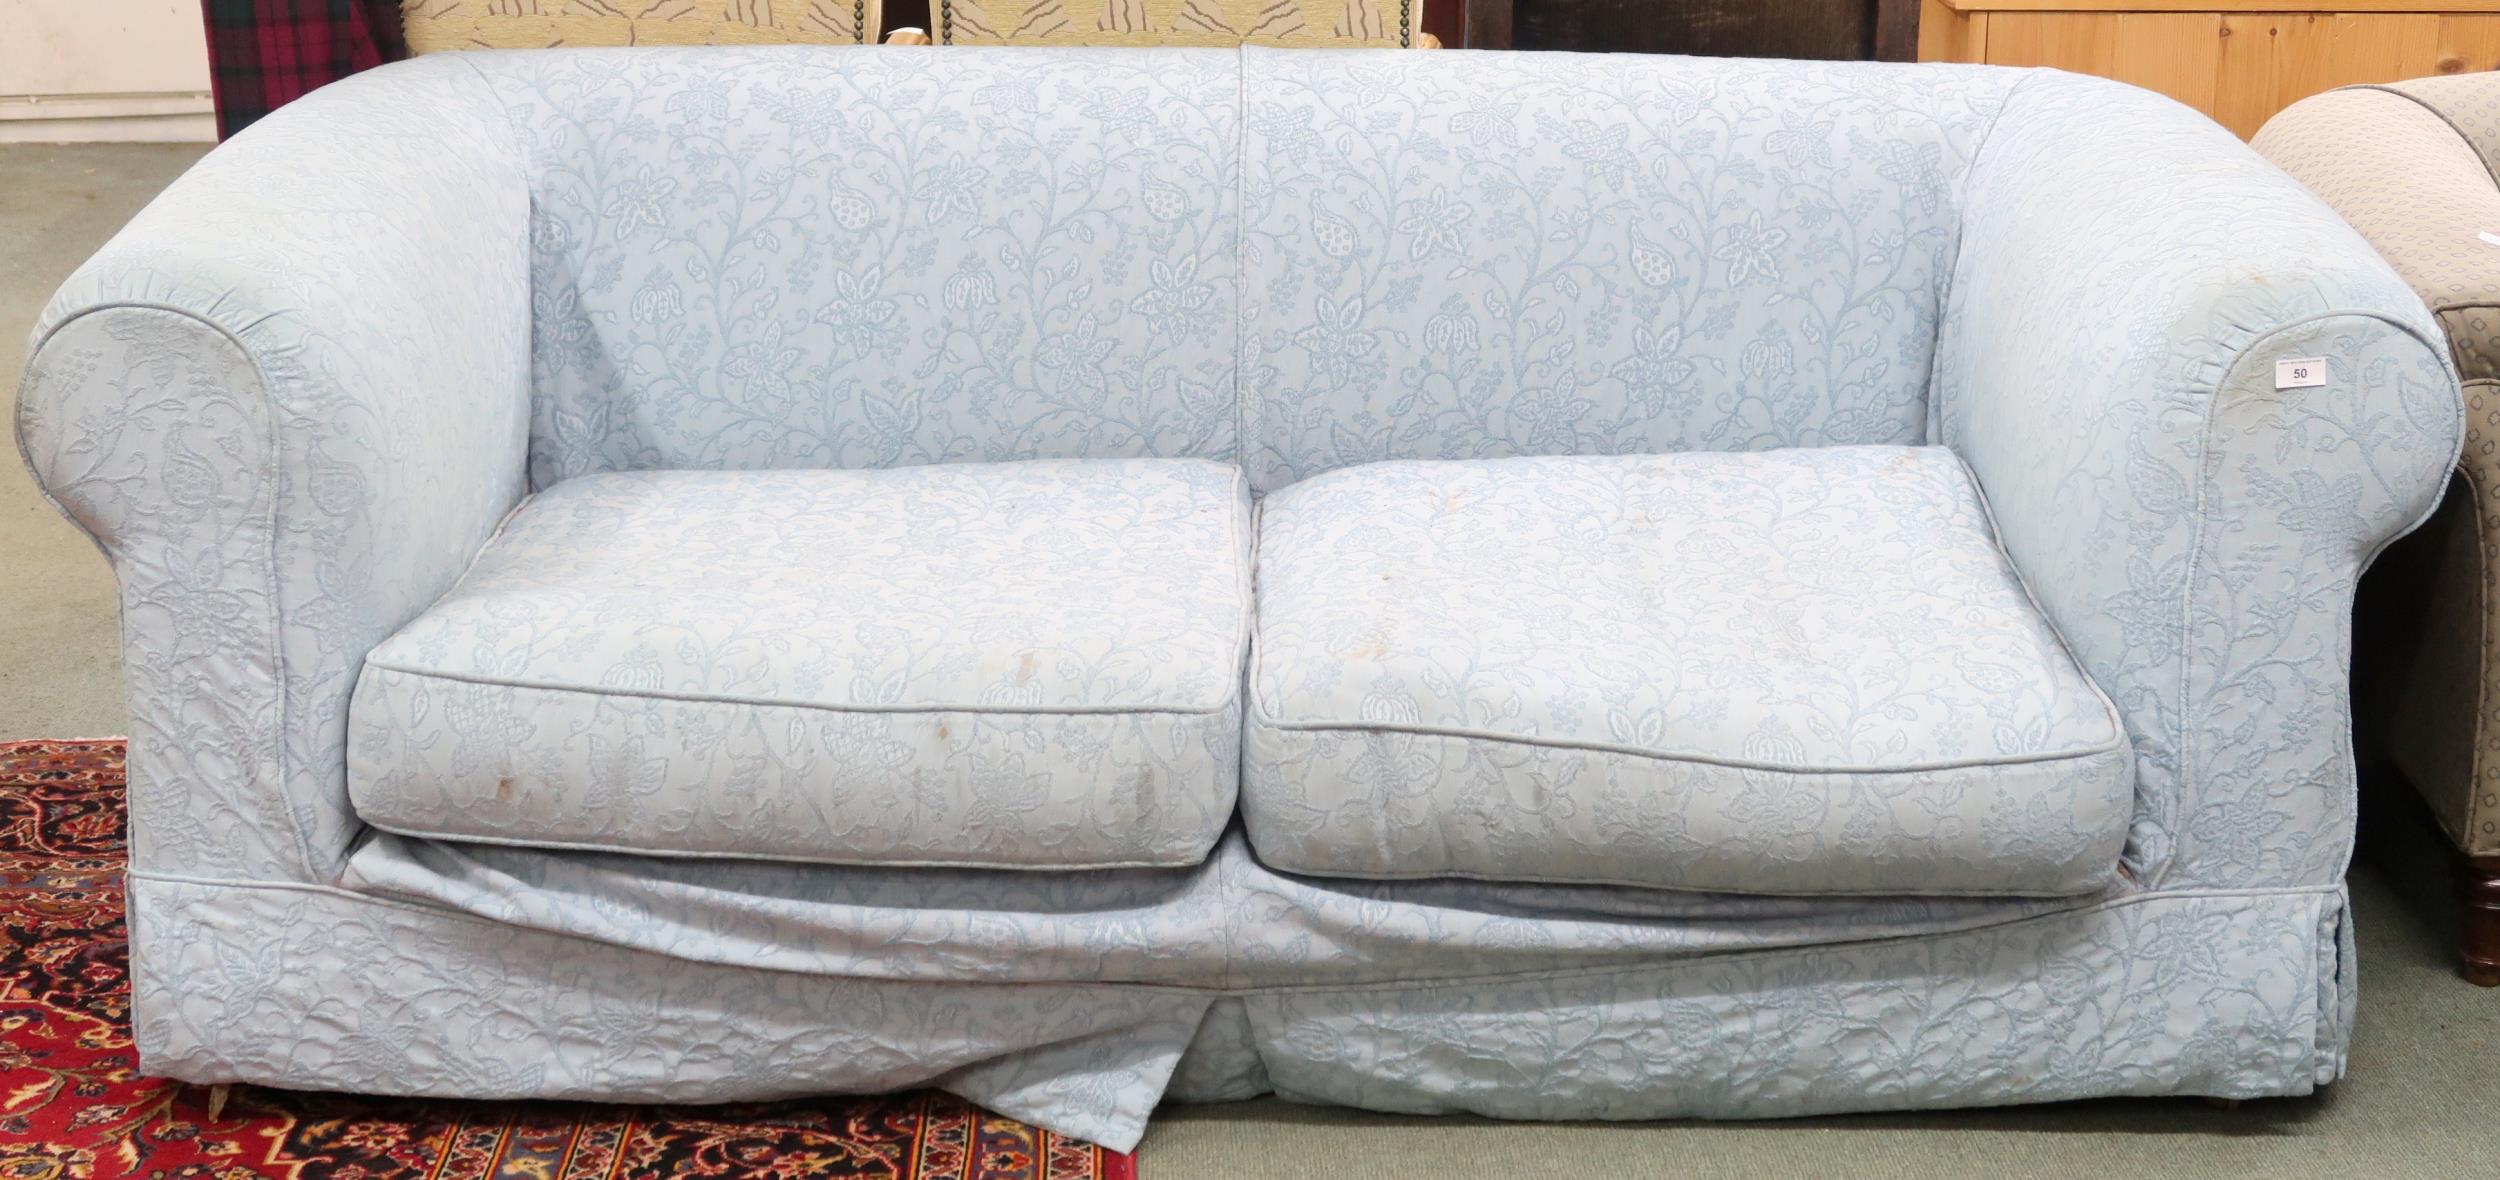 A 20th century blue Damask upholstered two seater settee, 69cm high x 183cm wide x 106cm deep